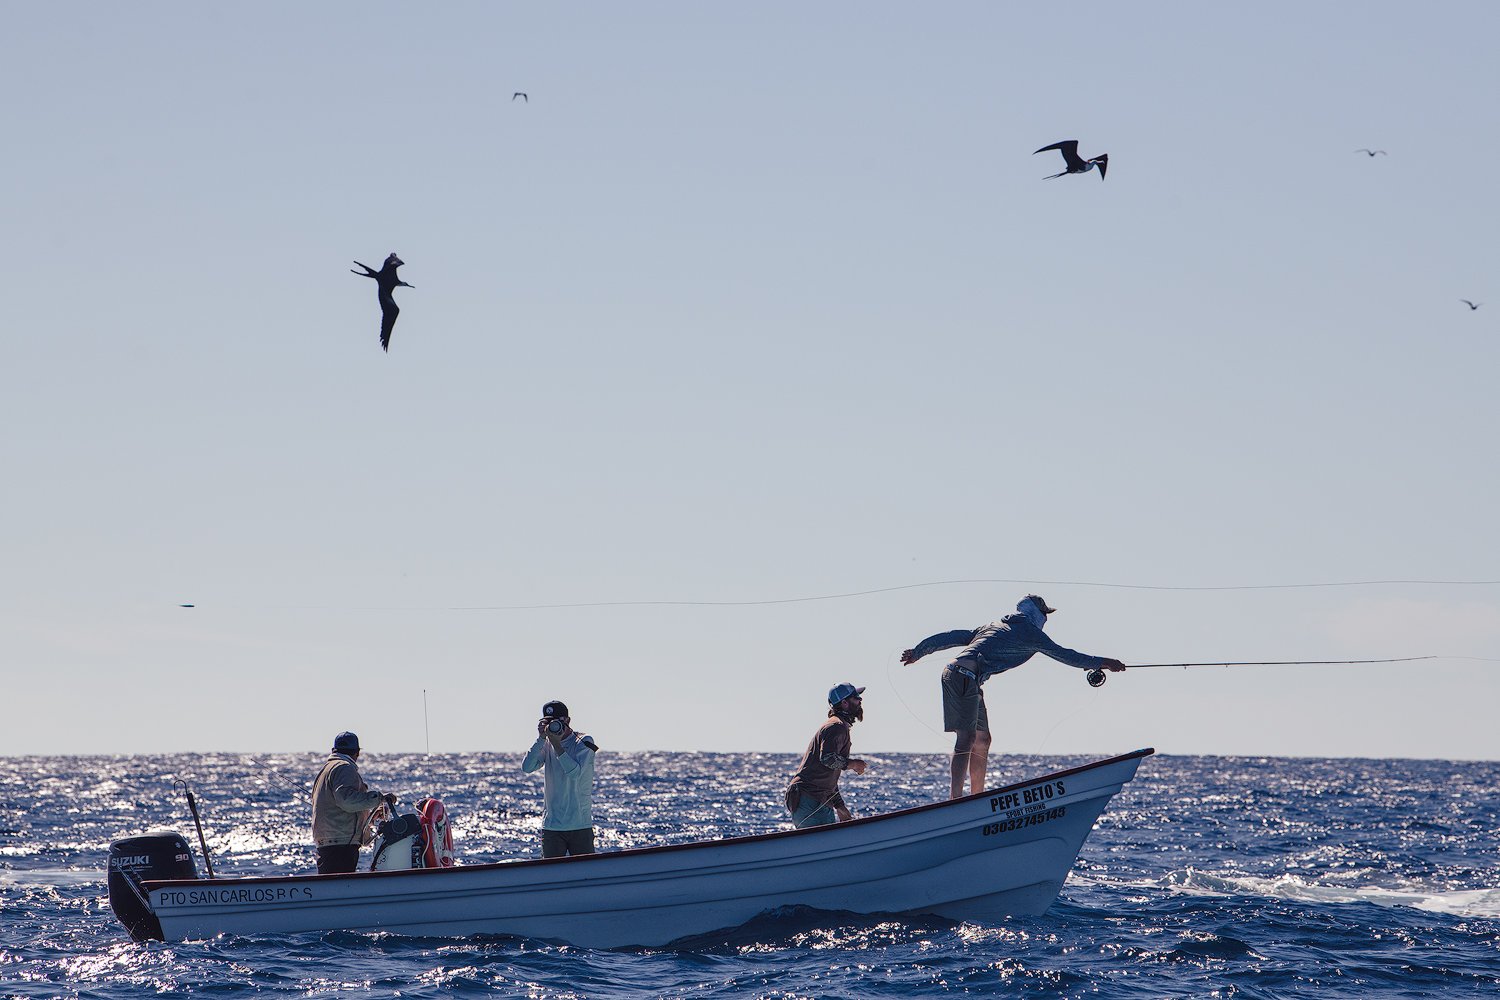 Fly fishing for marlin in Magdalena Bay, Mexico